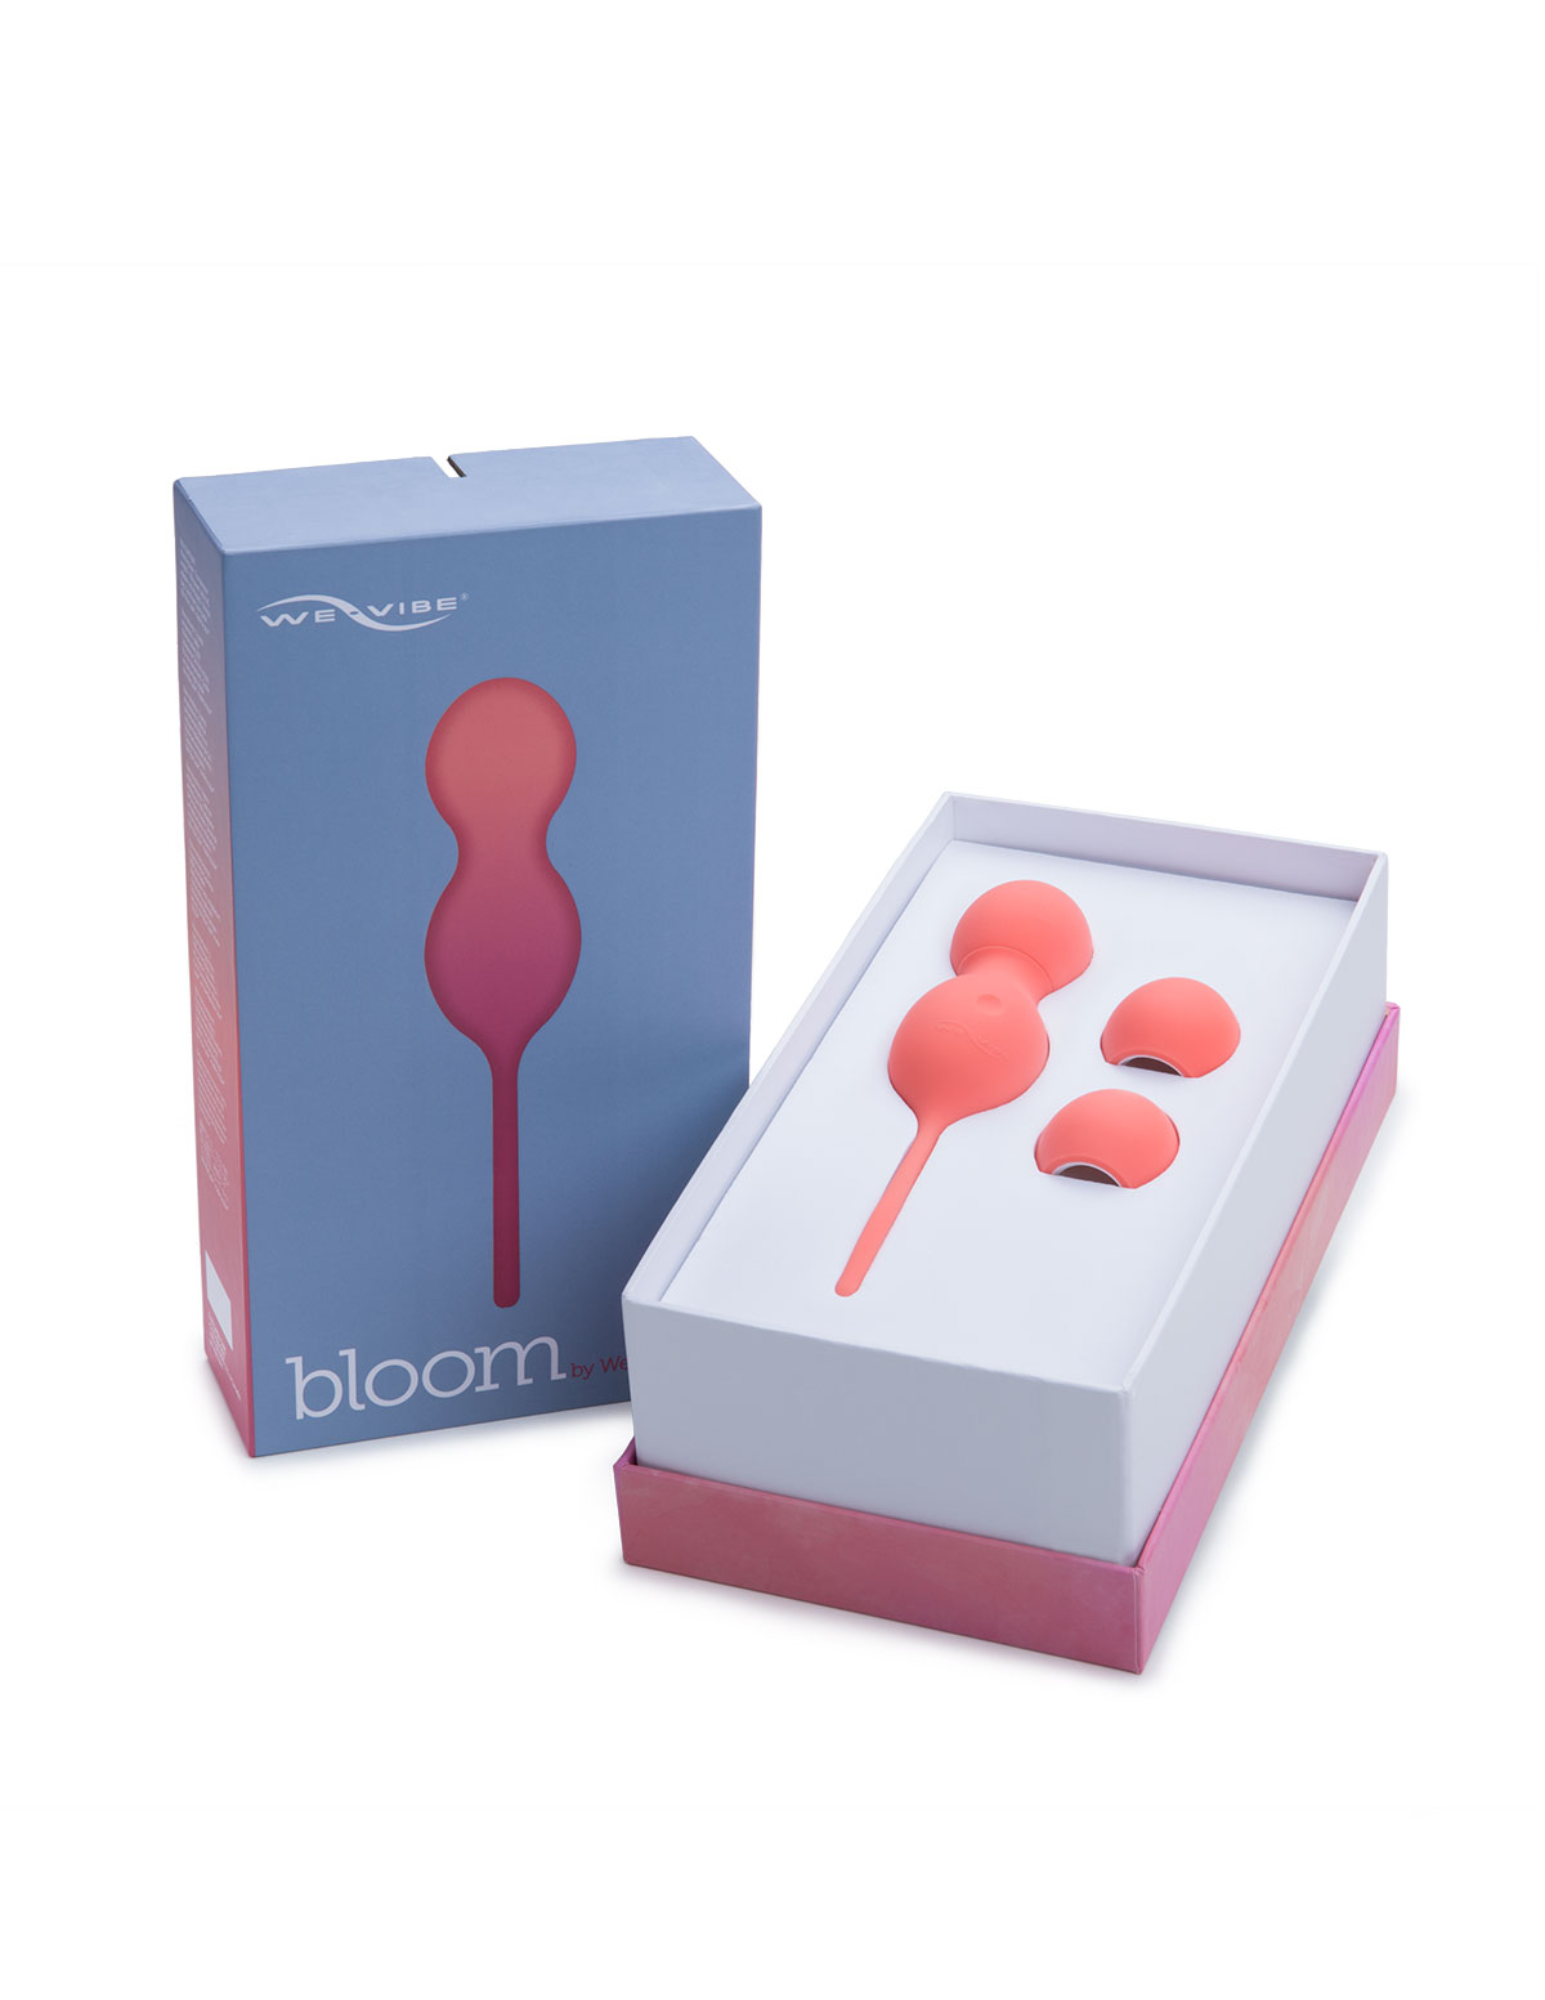 Bloom Vibrating App Controlled Kegel Balls from We-Vibe/Wow Tech